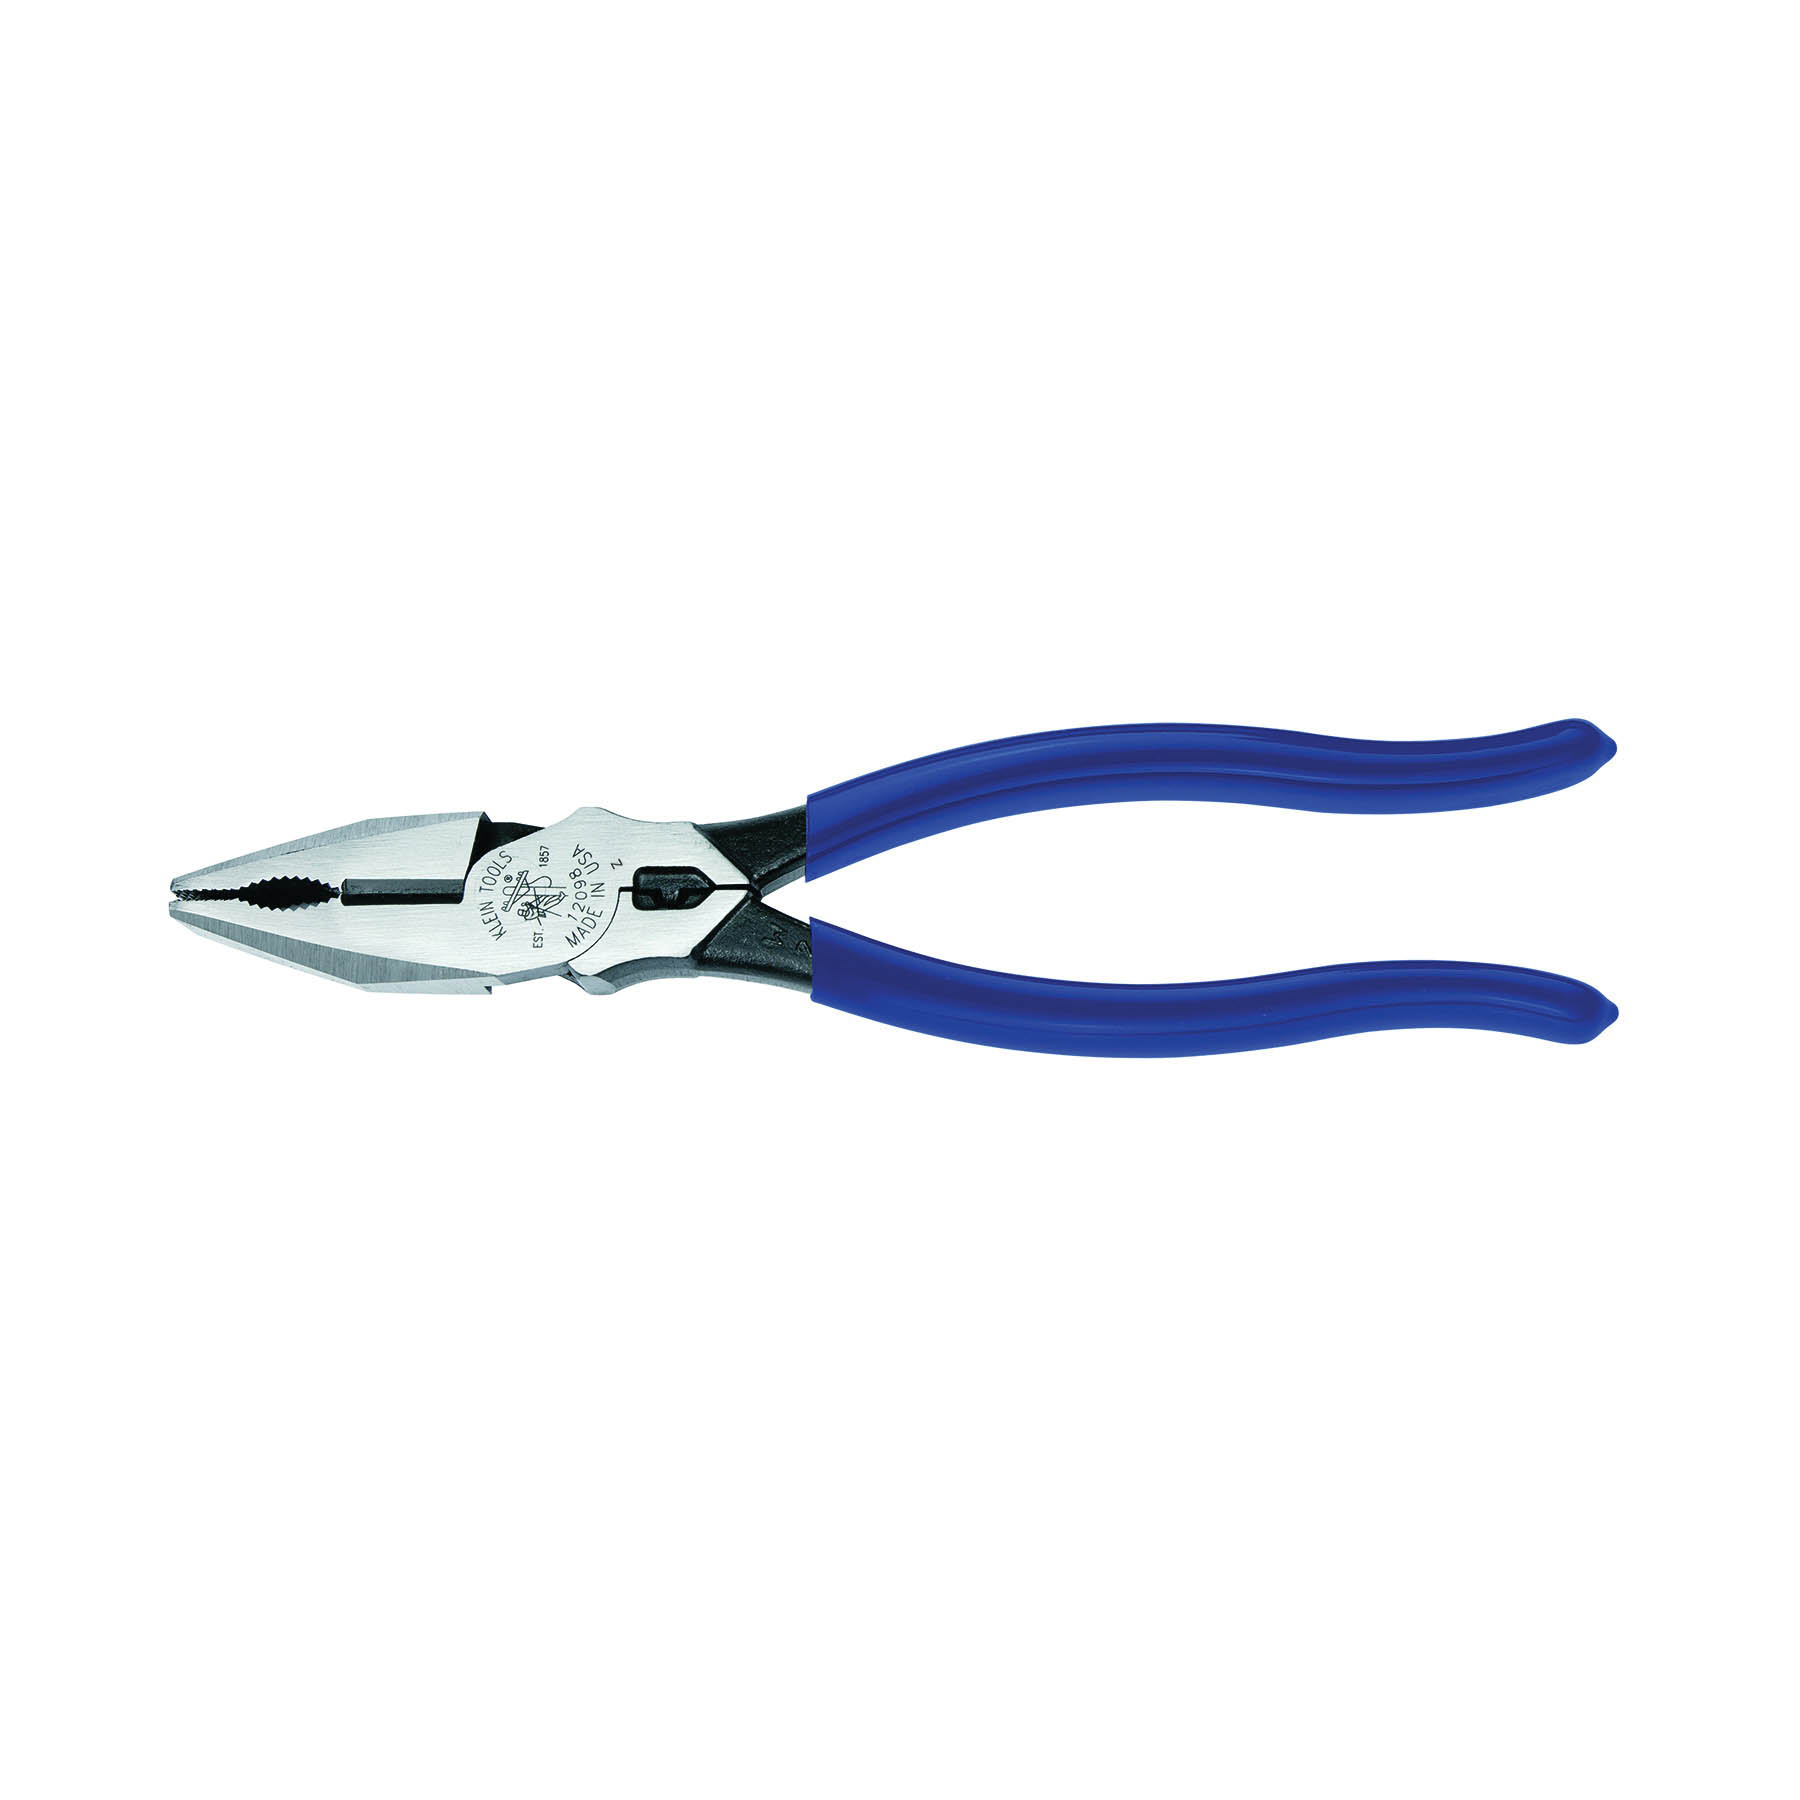 KLEIN TOOLS® 12098 Combination Pliers, 8-5/8 in OAL, 17/32 in THK Jaw Opening, 1-1/32 in W Jaw, 1-25/32 in L Jaw